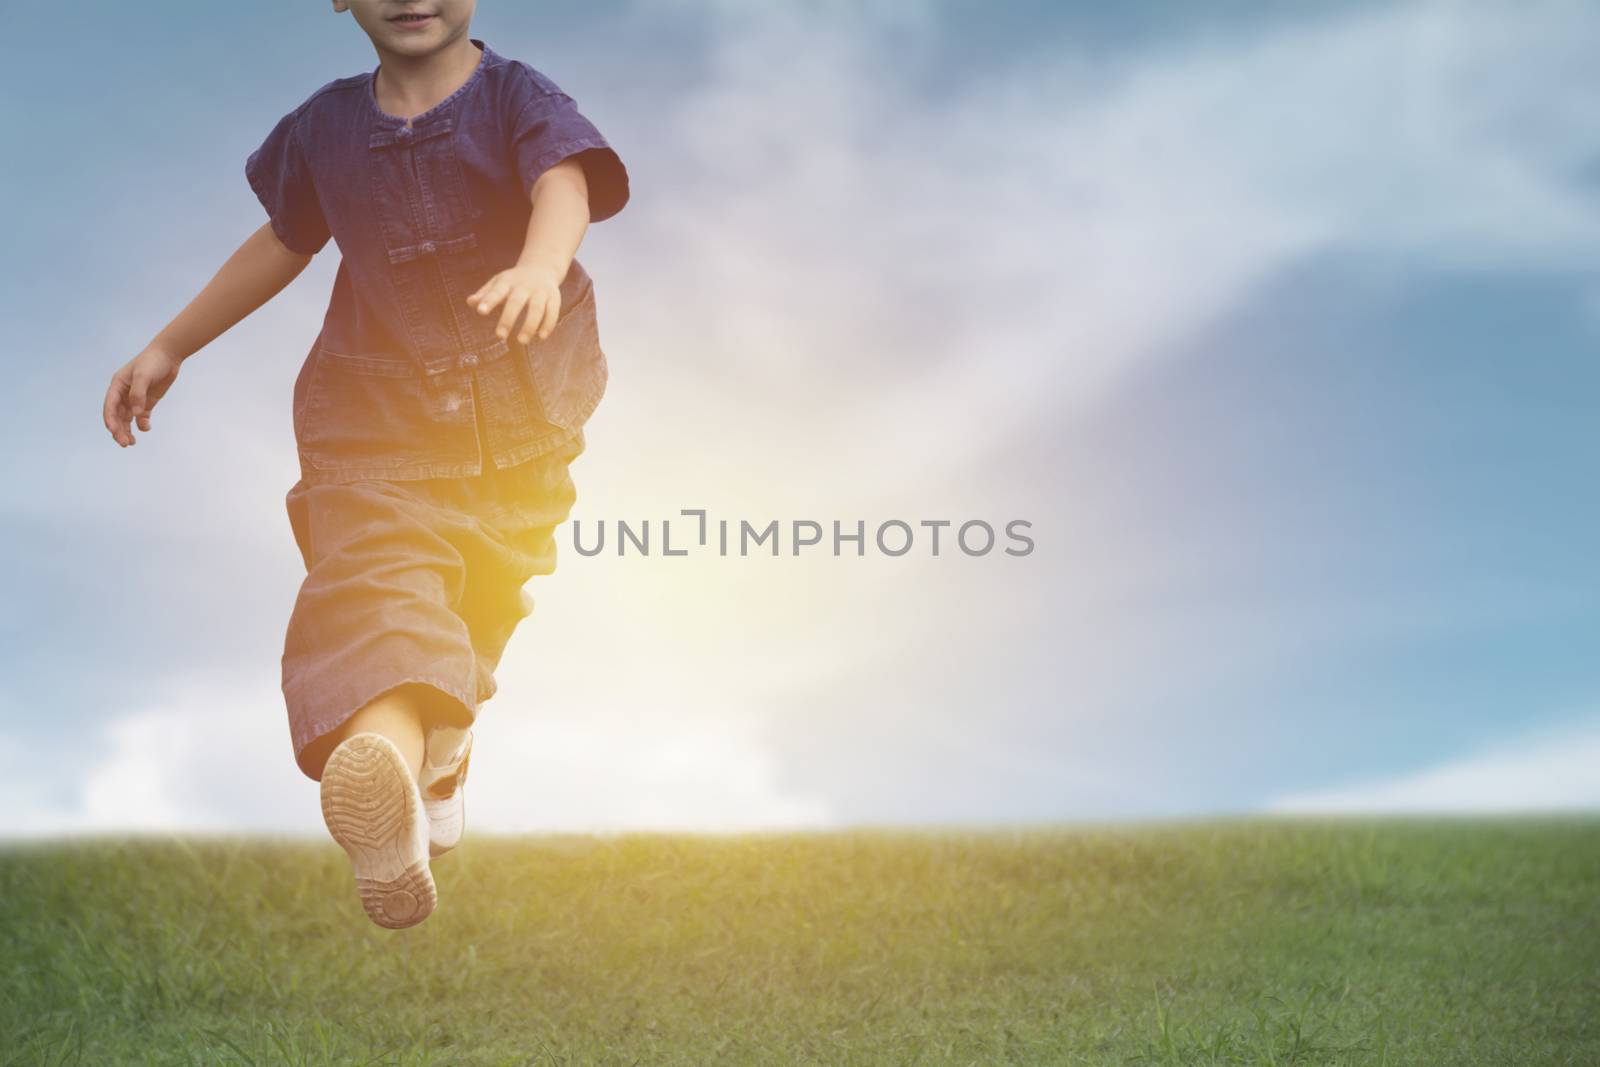 Kid running and playing have fun and joy at the grass field under the blue sky.